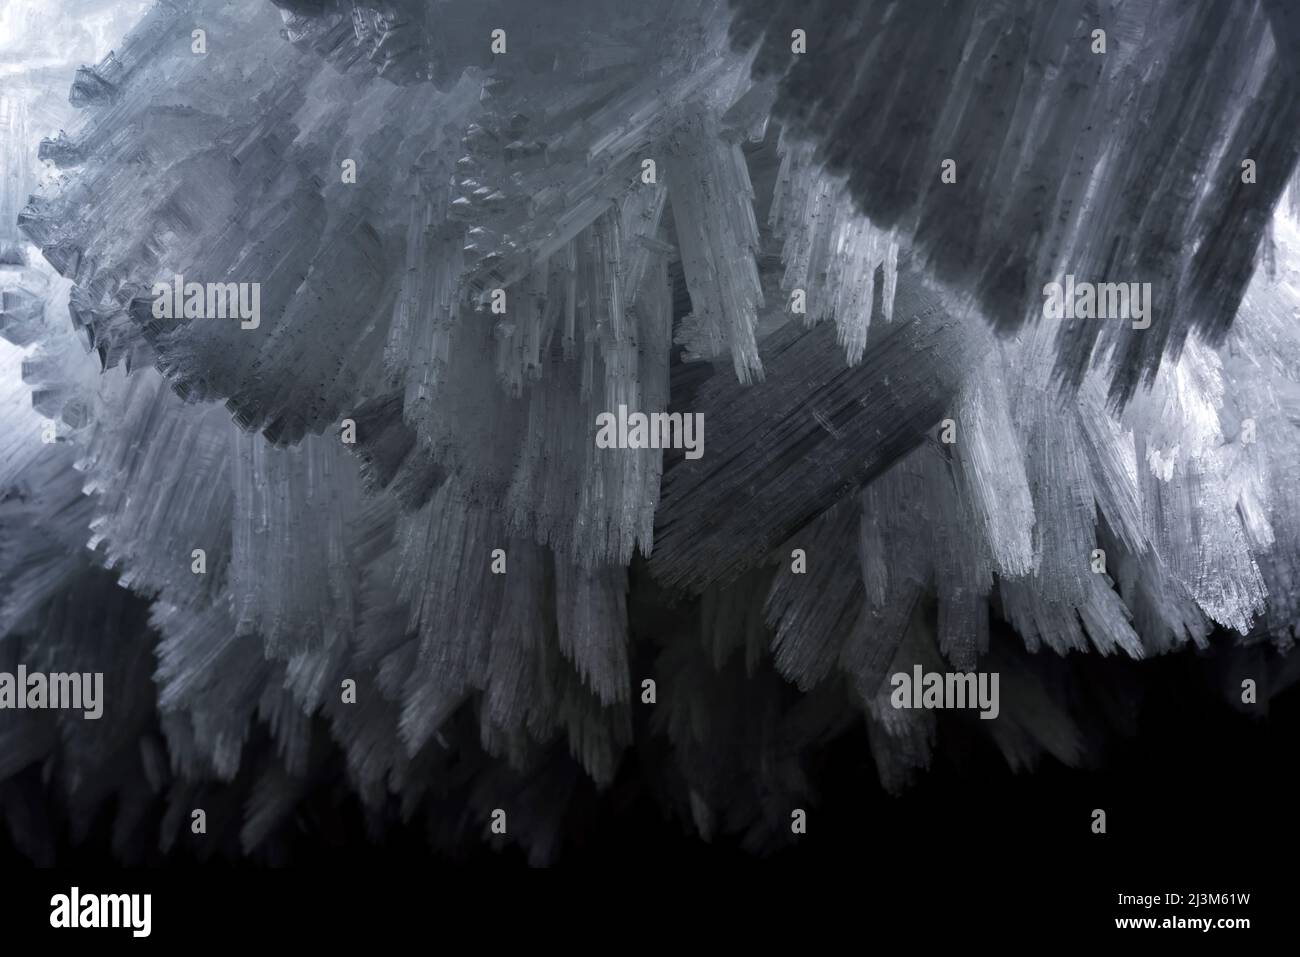 Detail photograph of the giant ice crystals clinging to the walls and ceiling of The Crystal Palace cave.; Greenland. Stock Photo